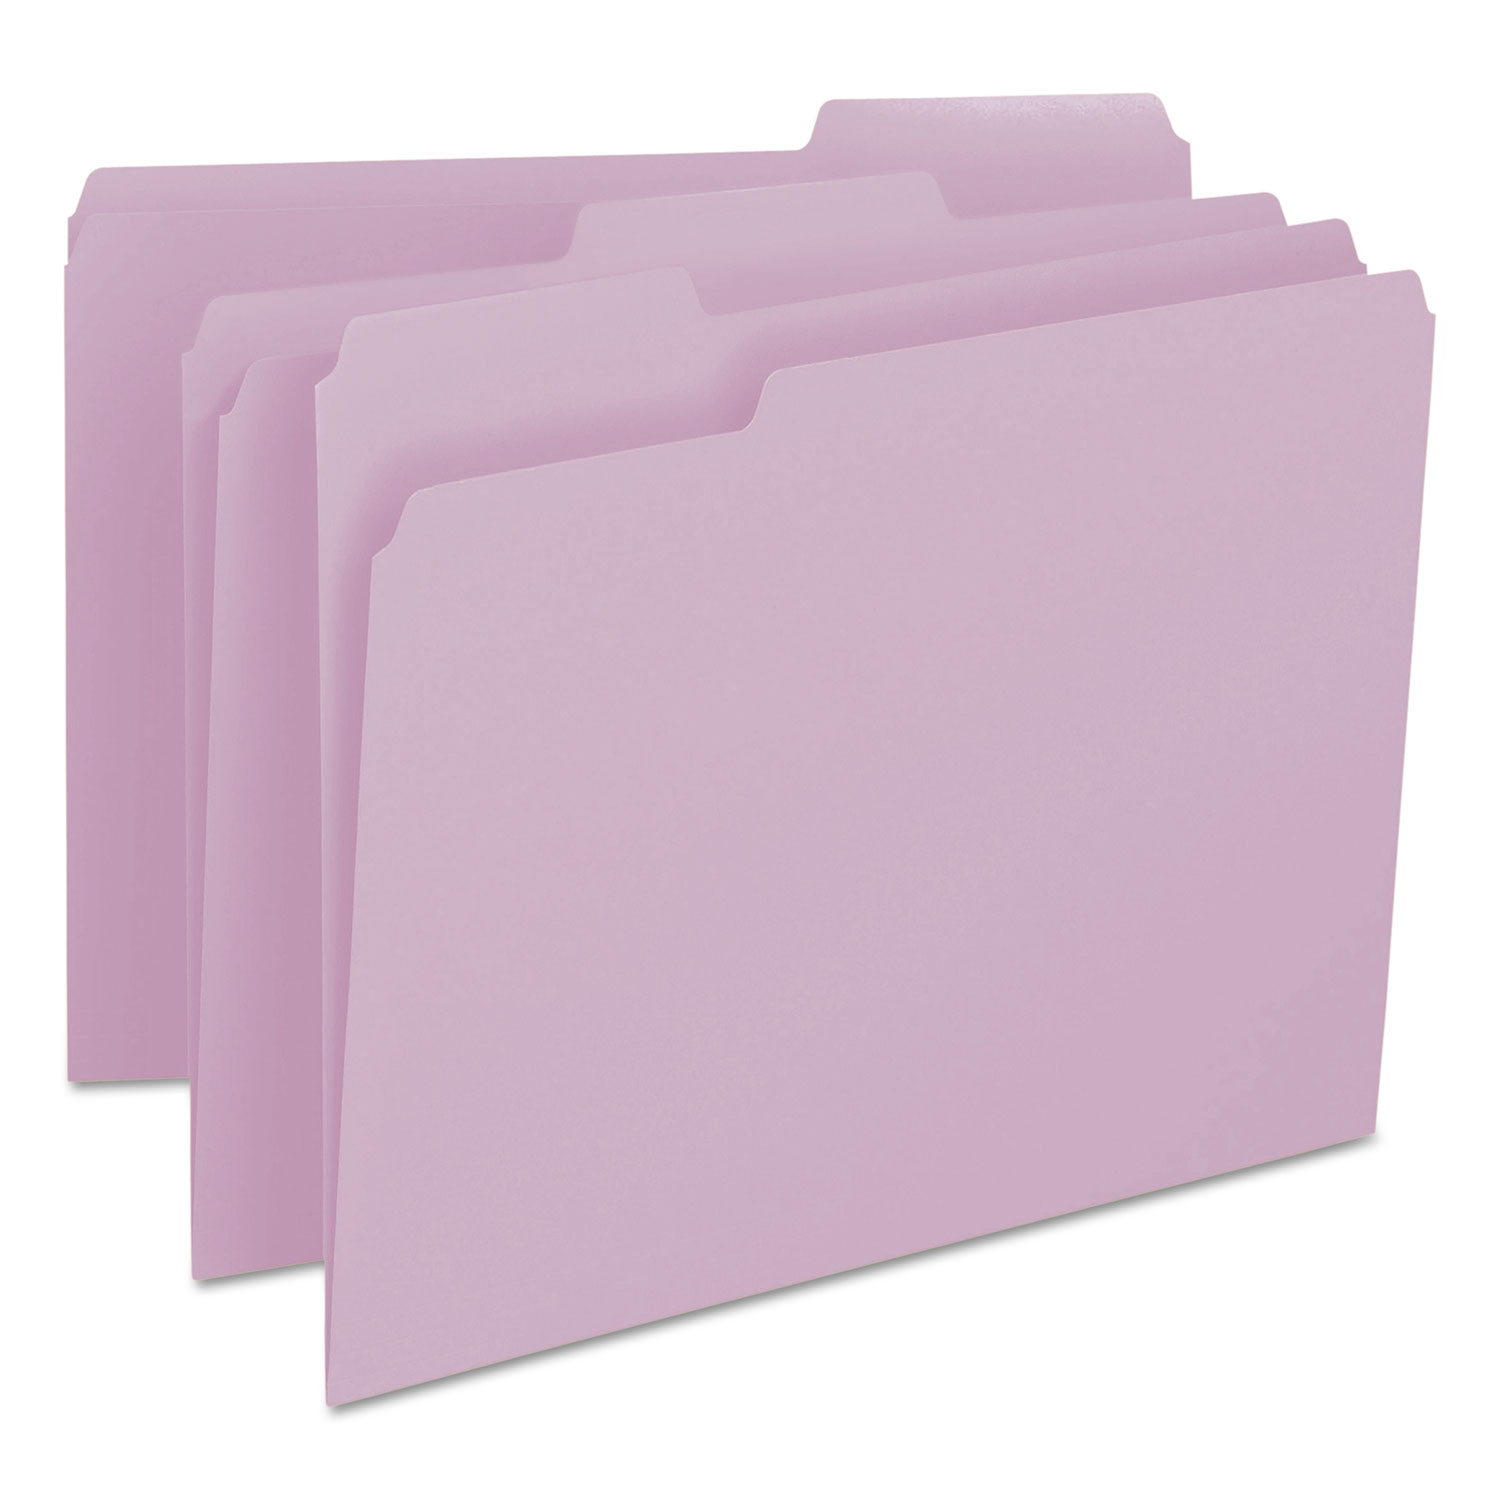  Smead 12443 Colored File Folders, 1/3-Cut Tabs, Letter Size, Lavender, 100/Box (SMD12443) 